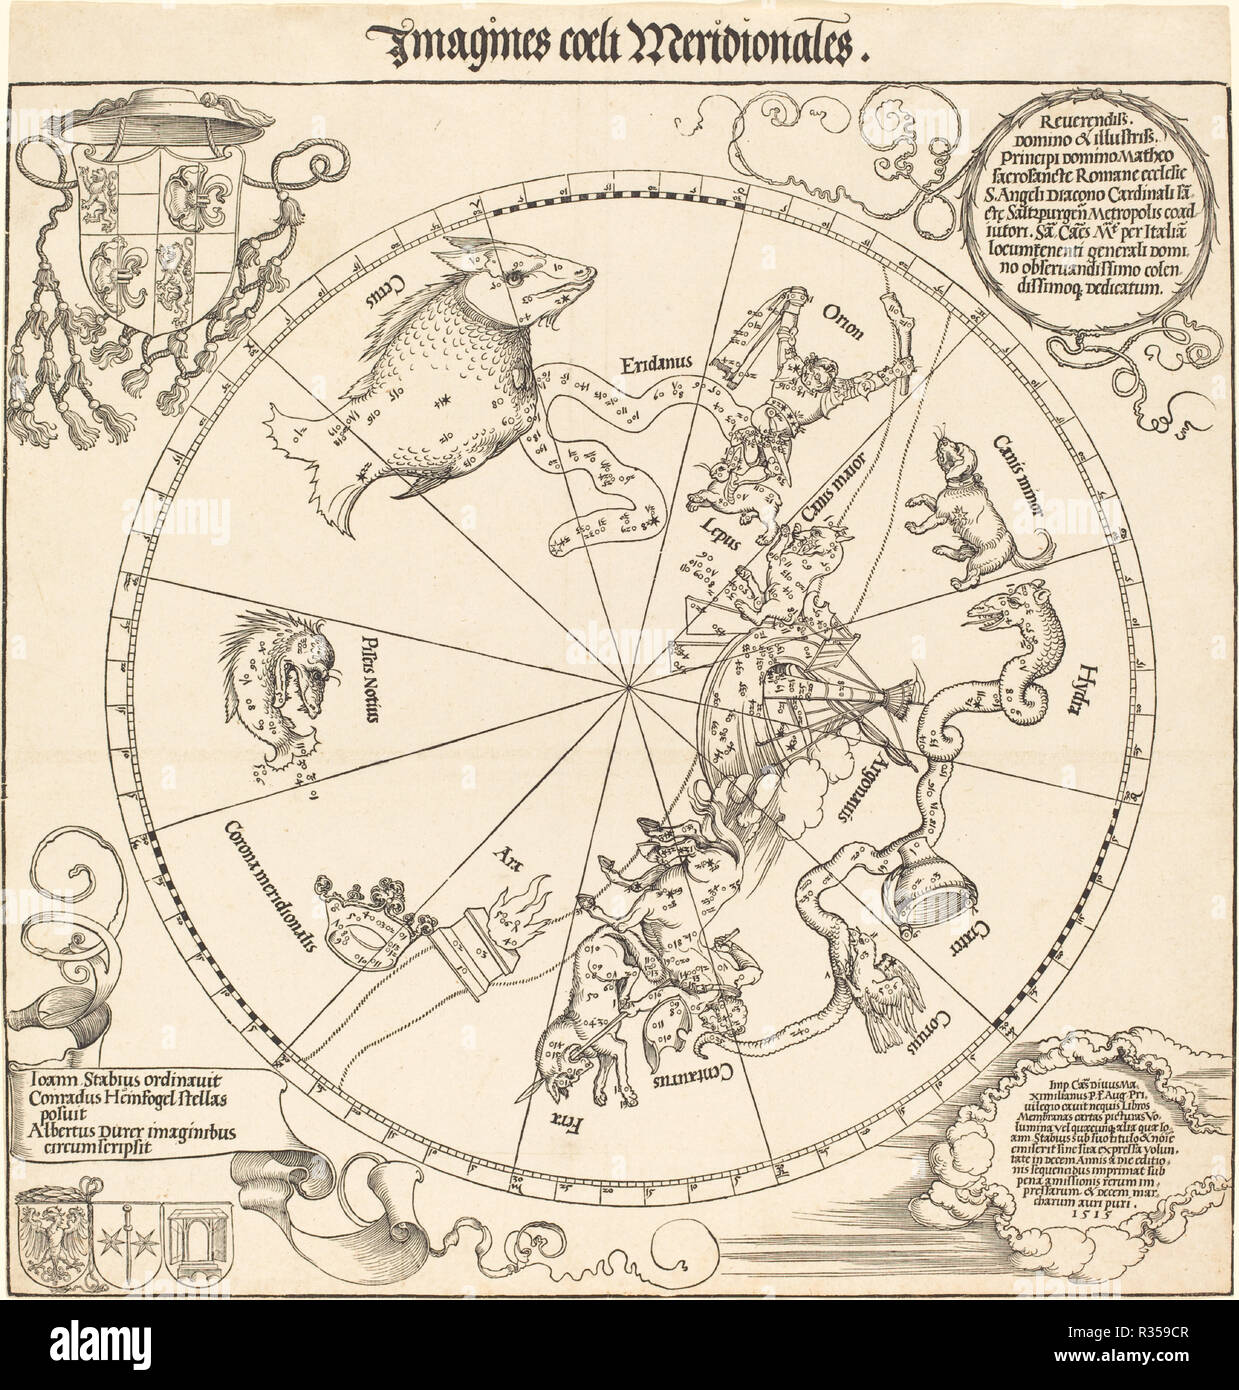 The Southern Celestial Hemisphere. Dated: 1515. Dimensions: sheet (trimmed to image): 45.3 x 43.3 cm (17 13/16 x 17 1/16 in.). Medium: woodcut. Museum: National Gallery of Art, Washington DC. Author: Dürer, Albrecht. Stock Photo